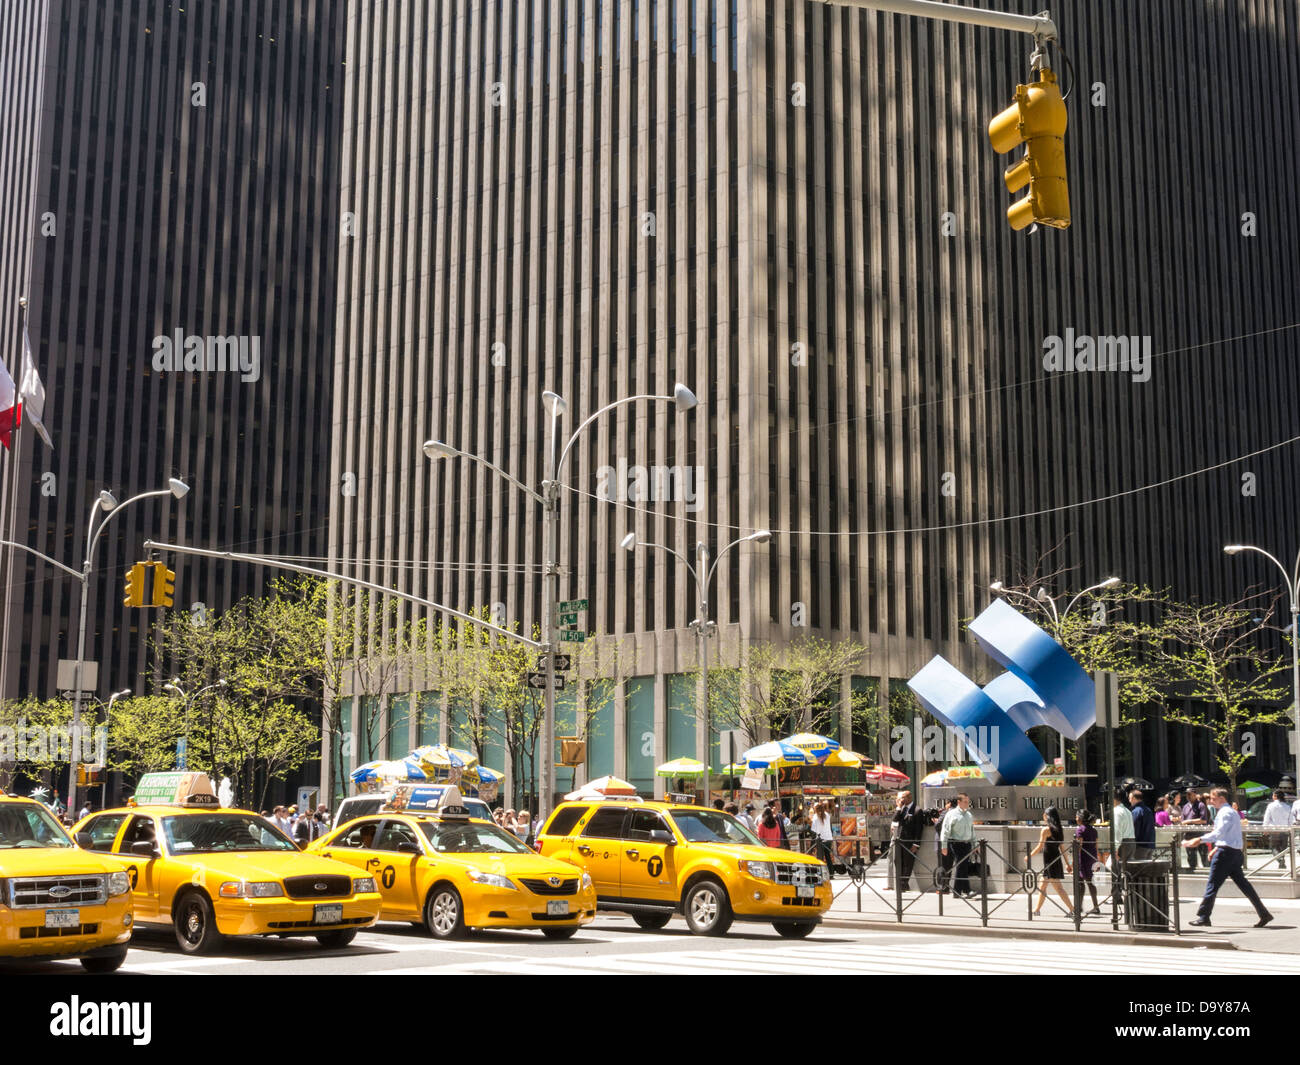 Taxis and Street Scene, Sixth Avenue, NYC Stock Photo